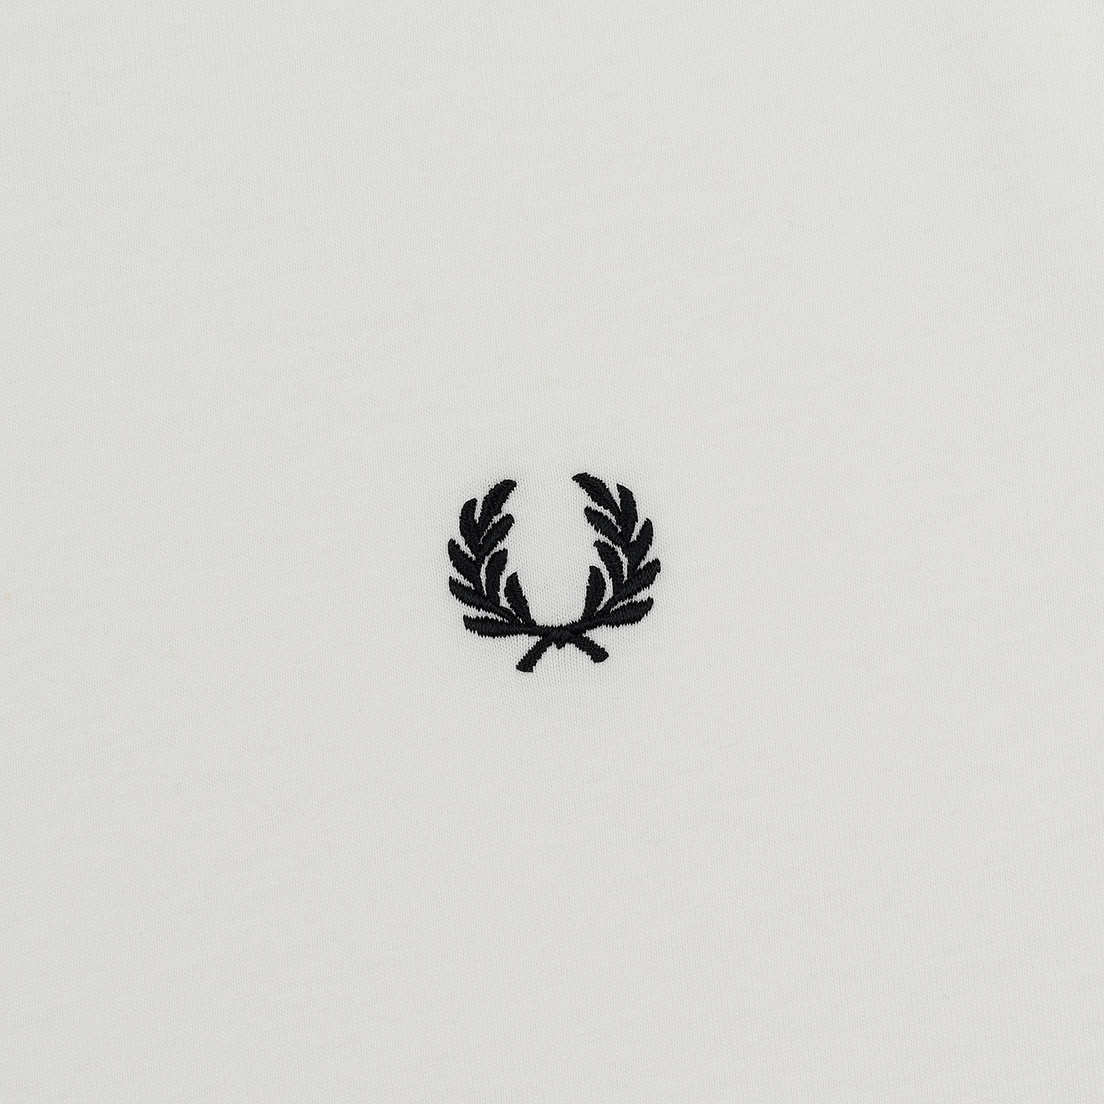 Fred Perry Женская футболка Laurel Sports Authentic Taped Ringer